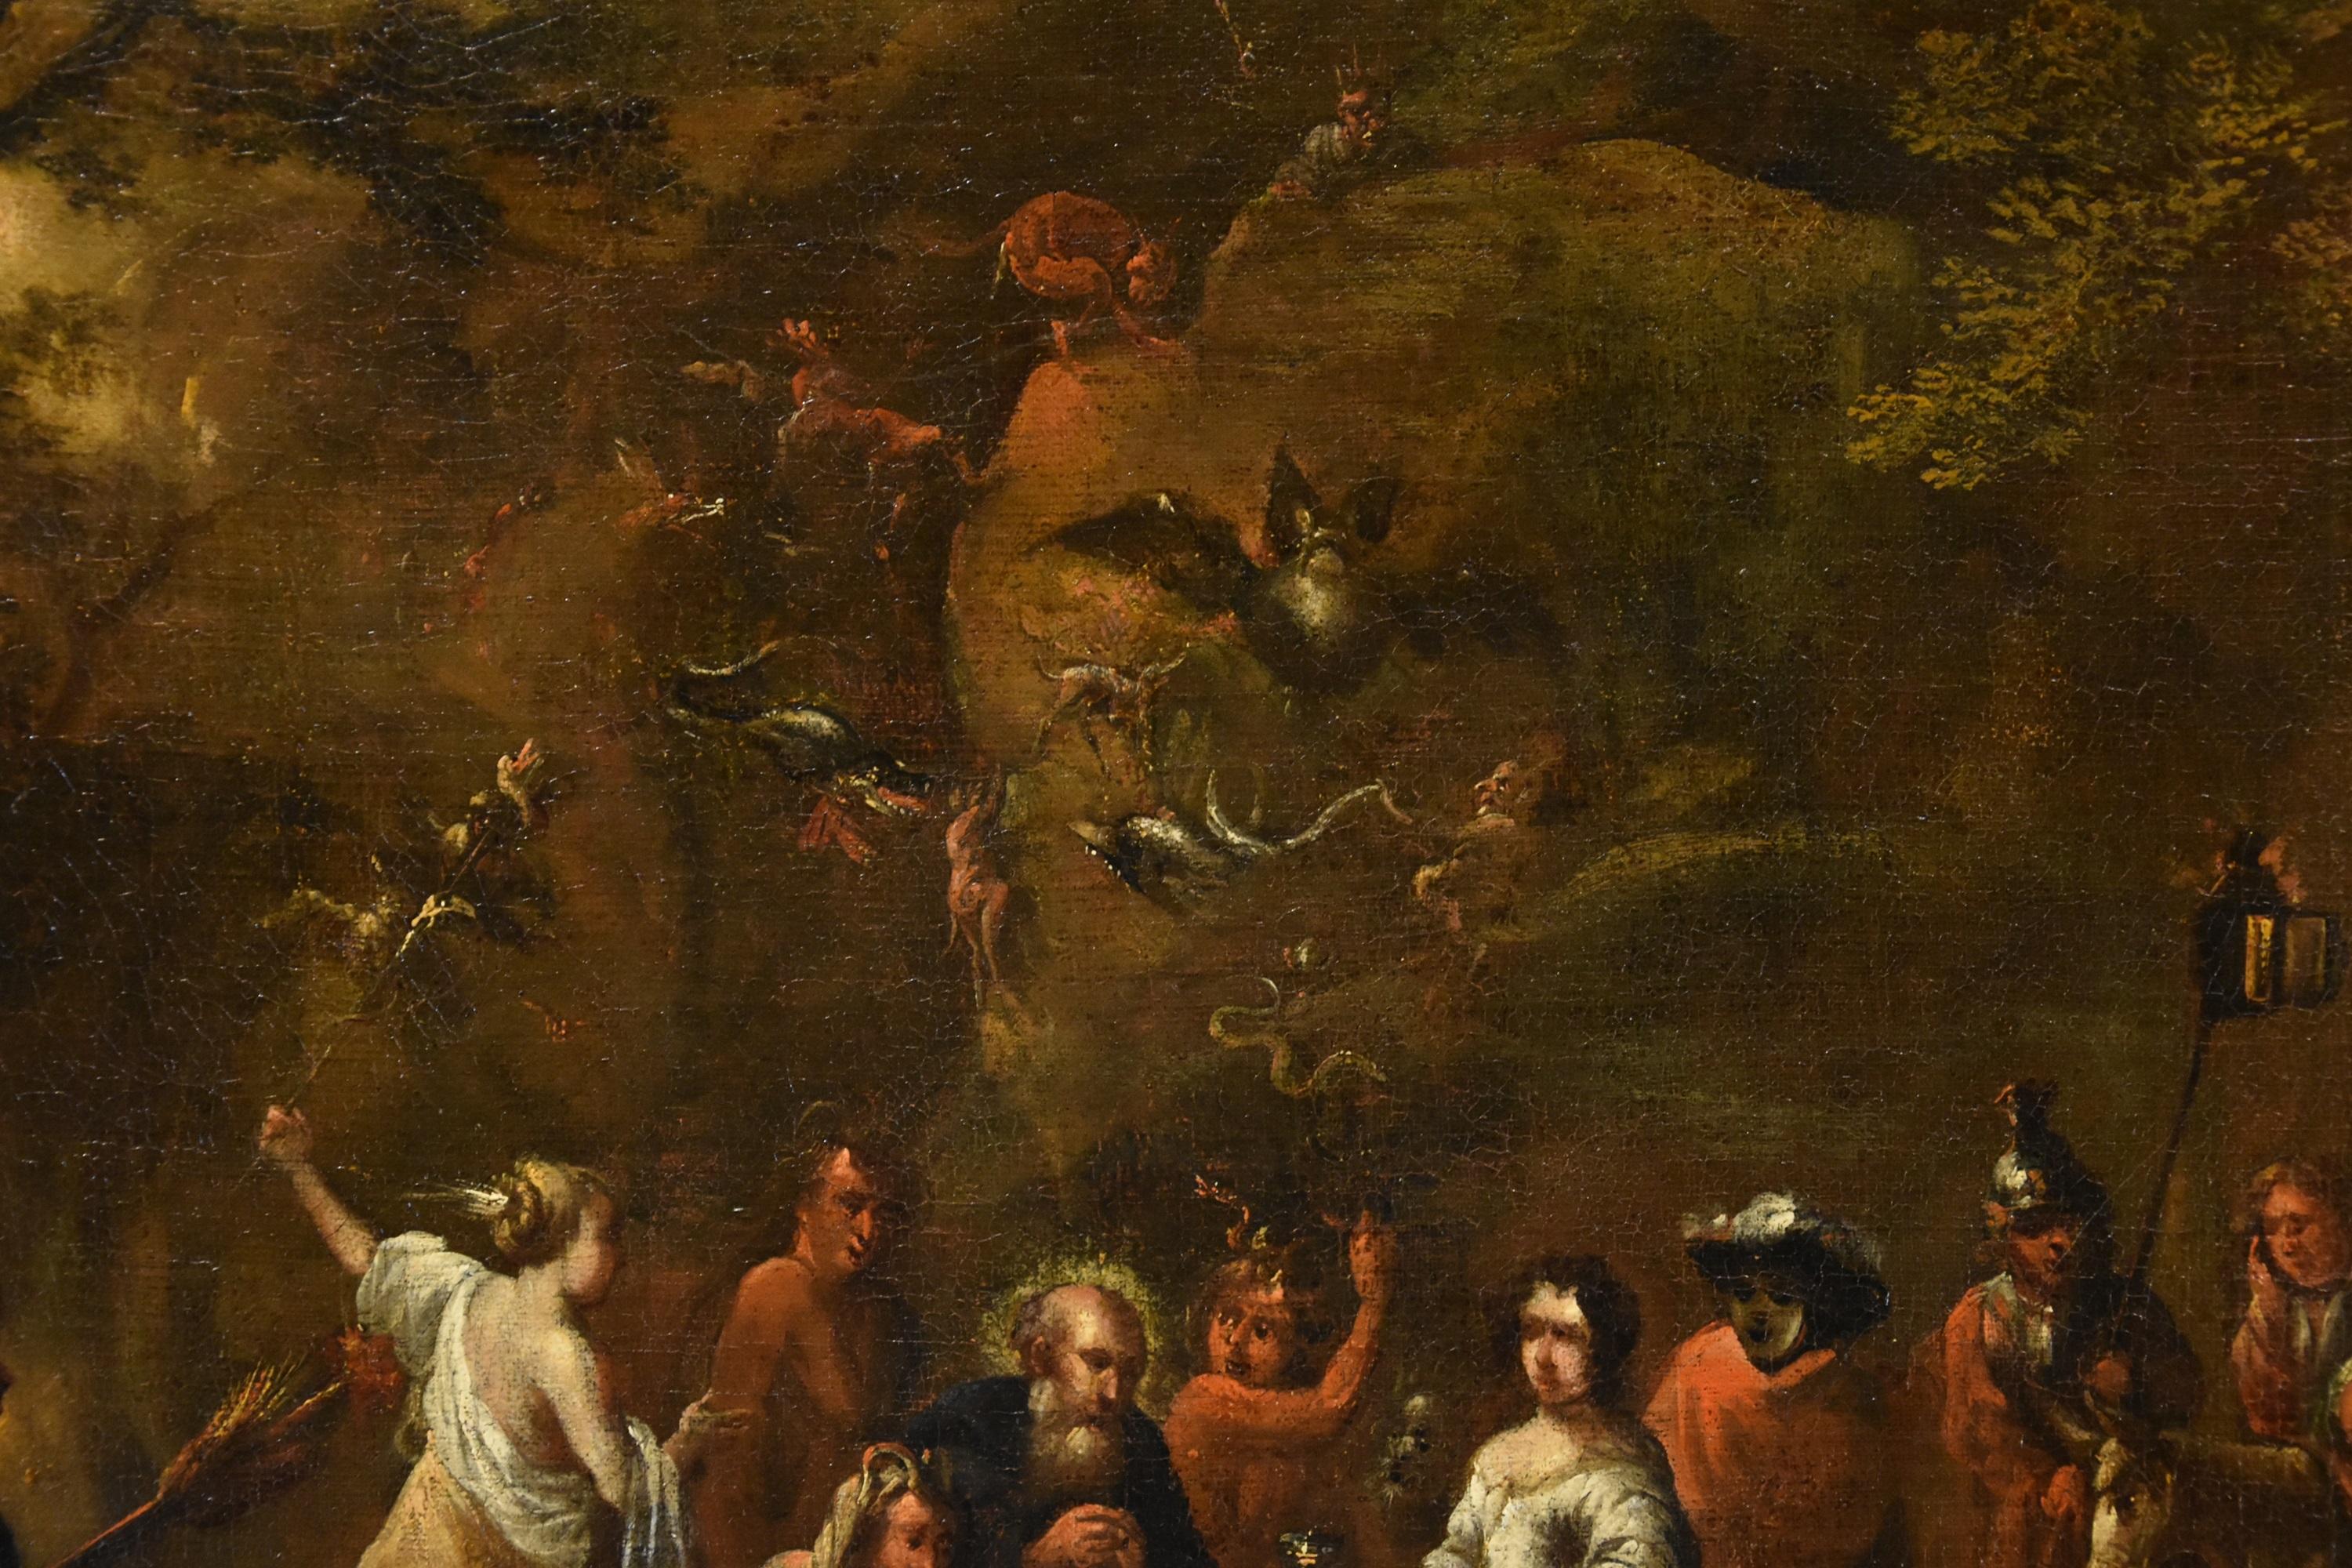 Temptations St. Anthony Teniers II Paint 17th Century Oil on canvas Flemish  For Sale 5